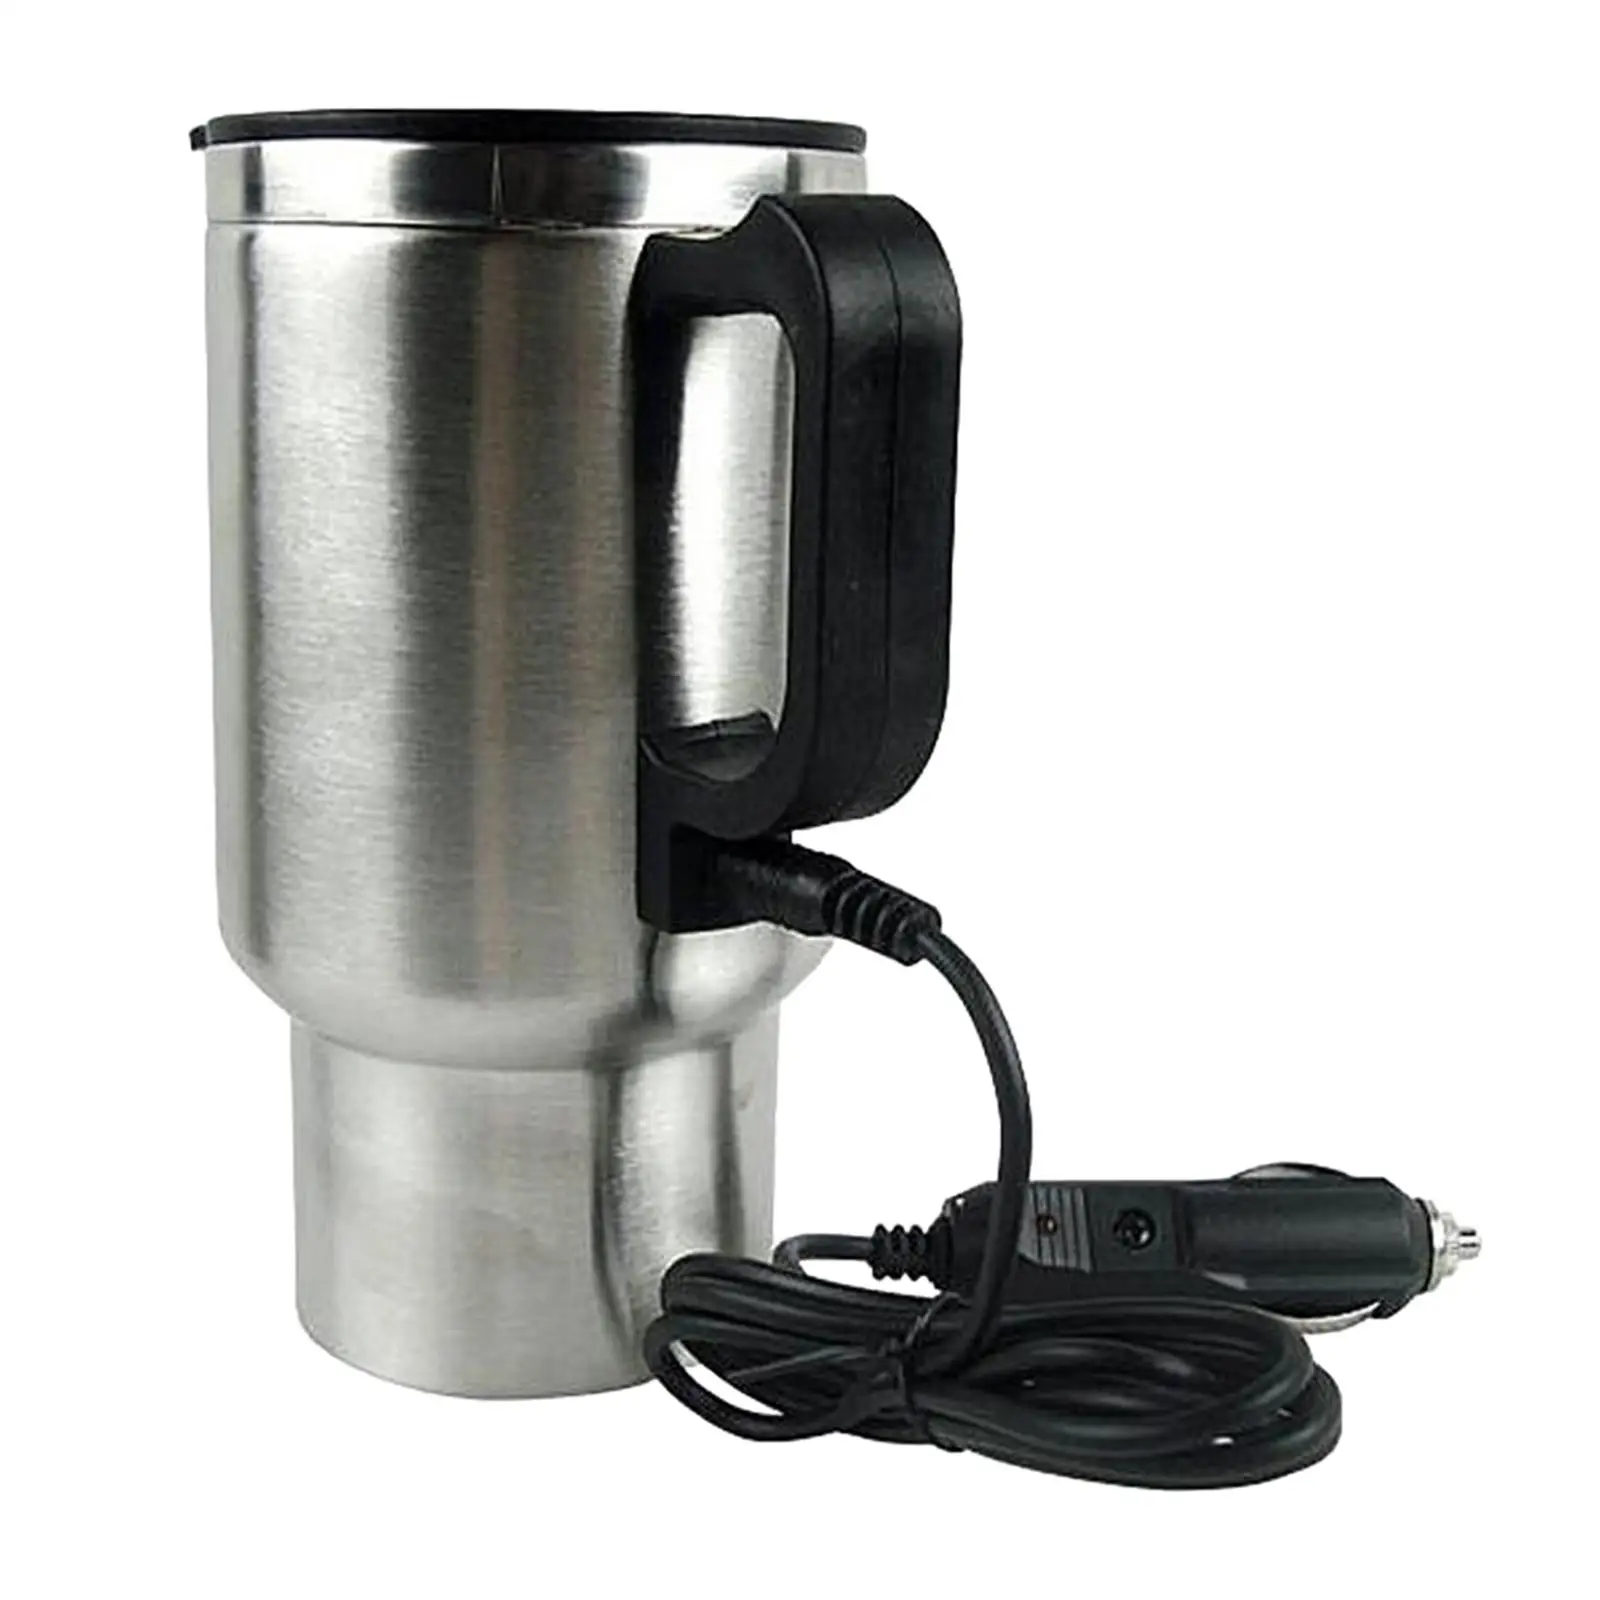 Car Electric Heating Mug Cup Travel Kettle 12V 0.48L Water Bottle Stainless Steel for Water Tea Coffee Milk Multipurpose